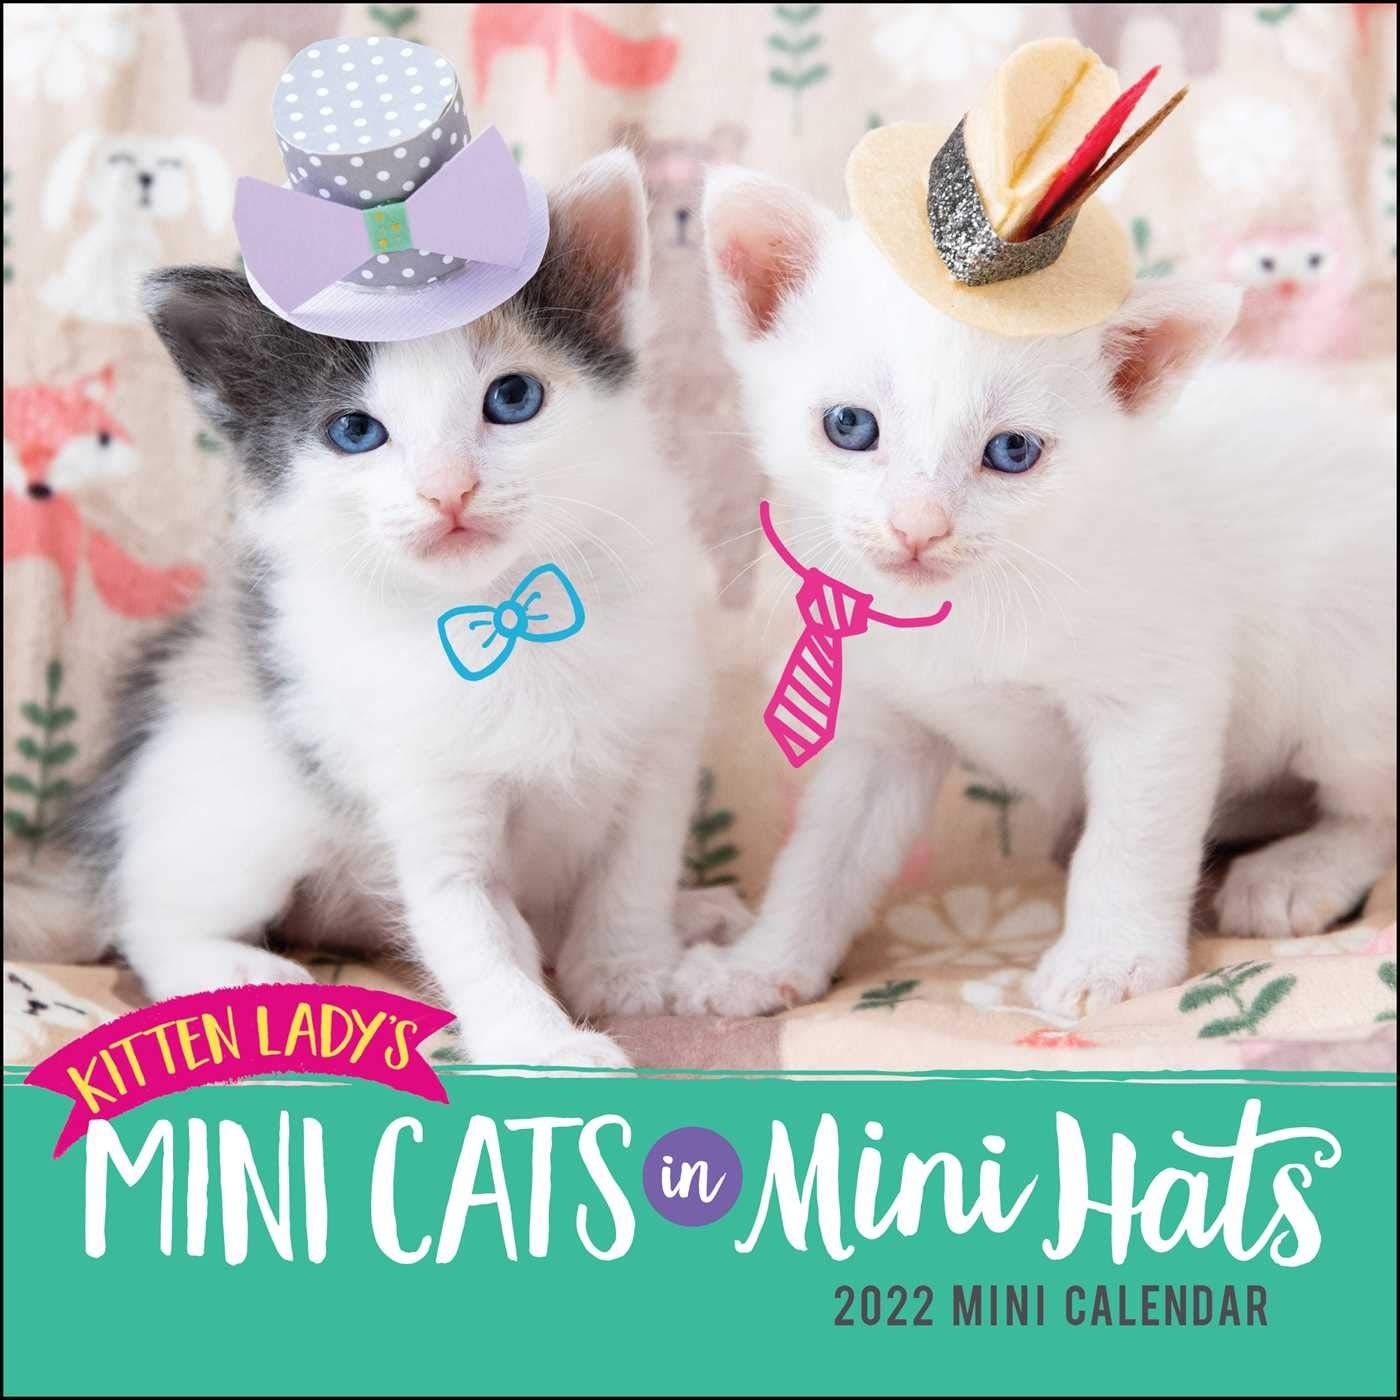 Features photos of tiny kittens wearing hand-crafted caps, hats, crowns and micro costumes. 